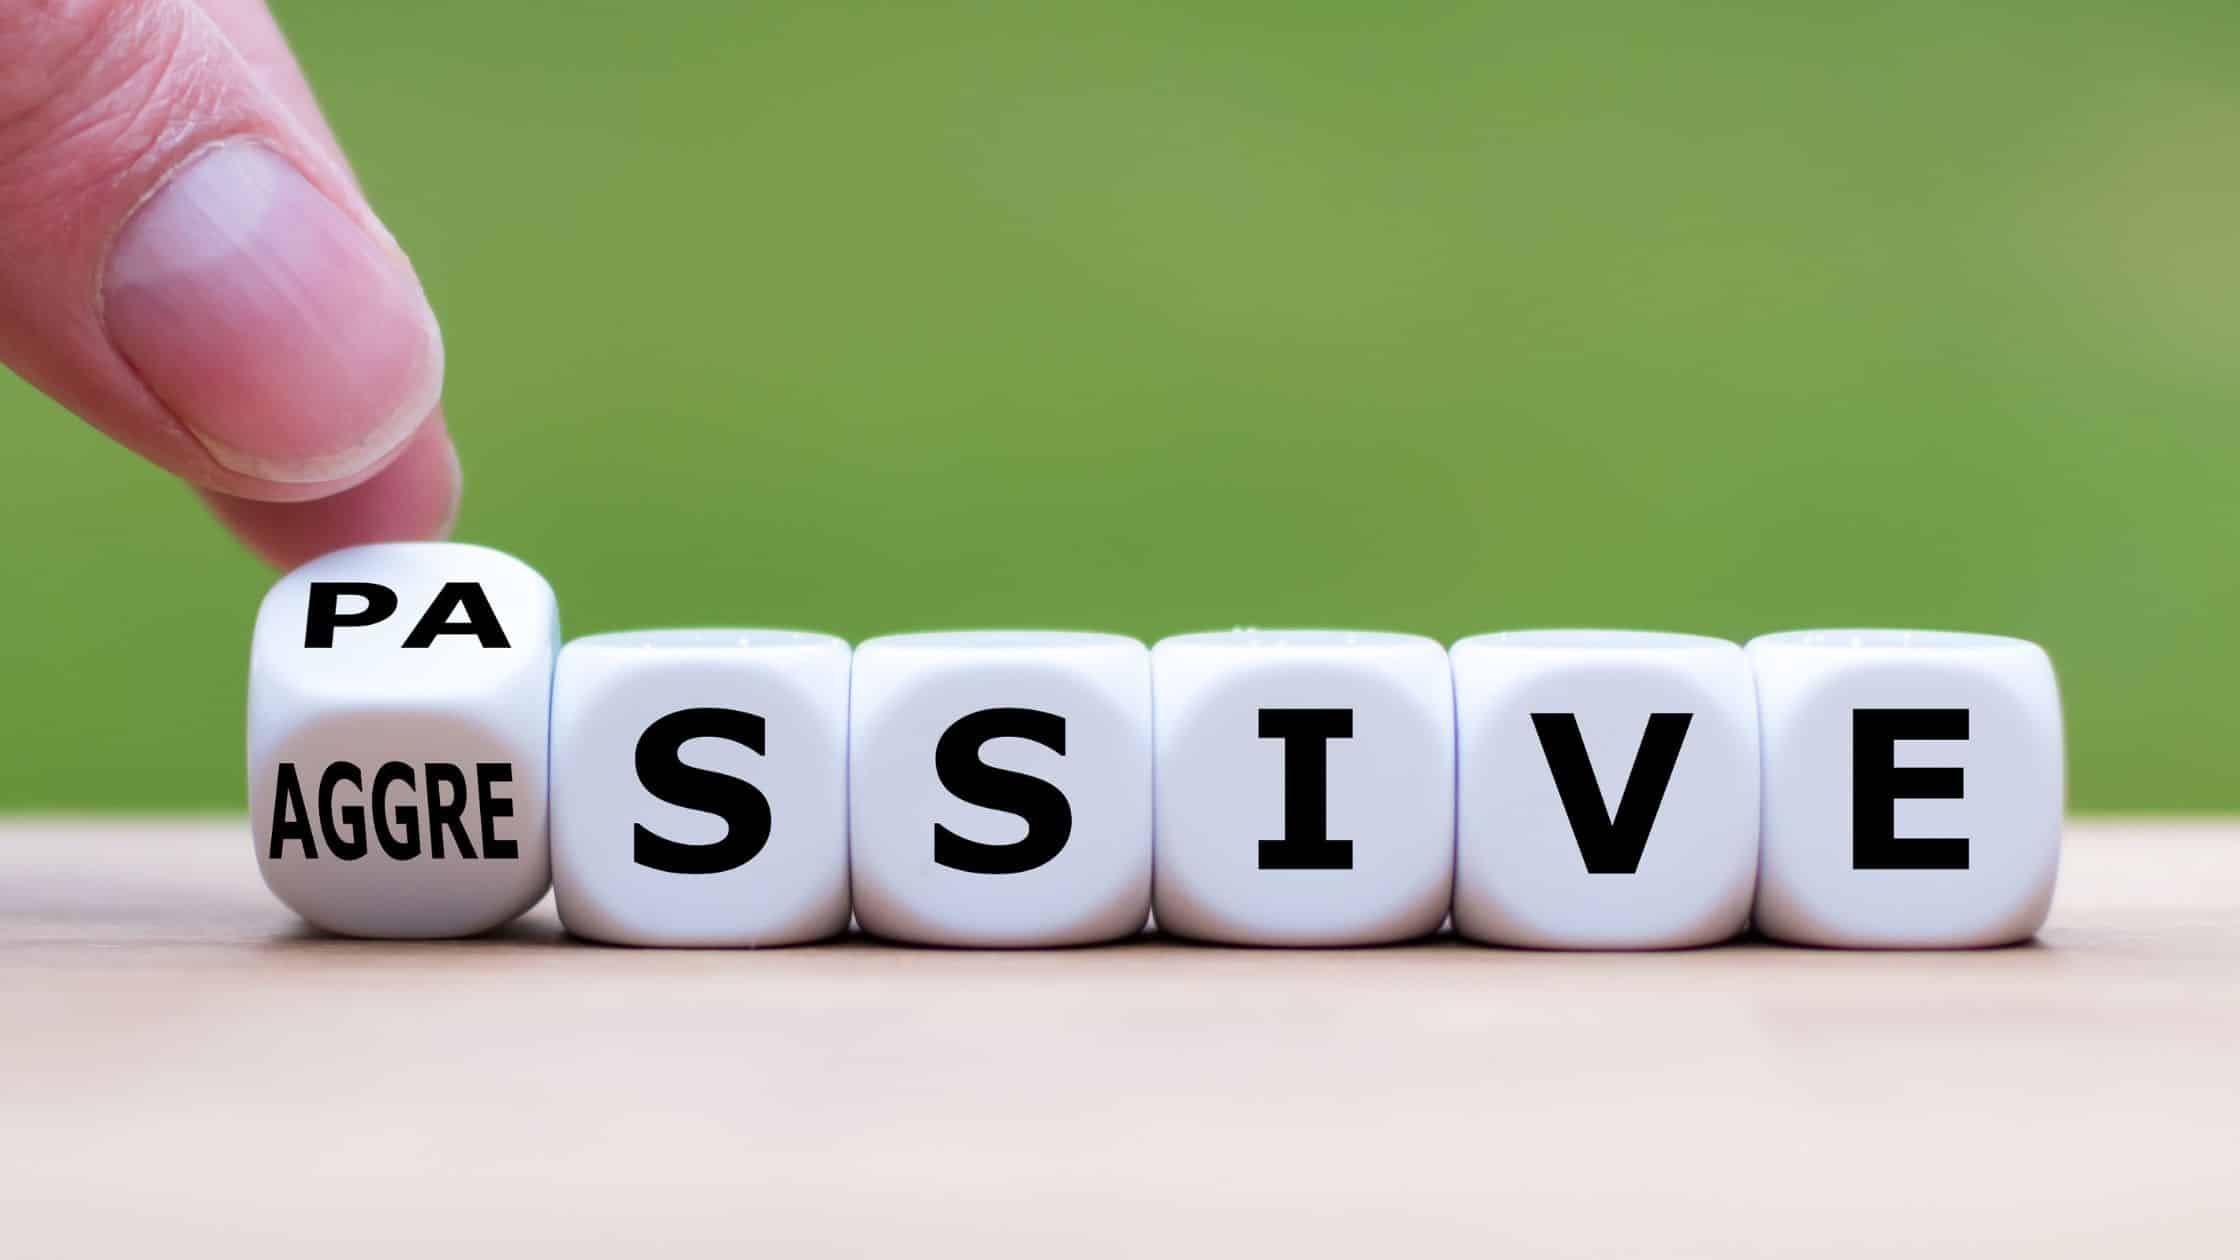 Develop effective strategies to respond to your passive-aggressive boss. This article offers actionable advice to enhance communication and workplace harmony.